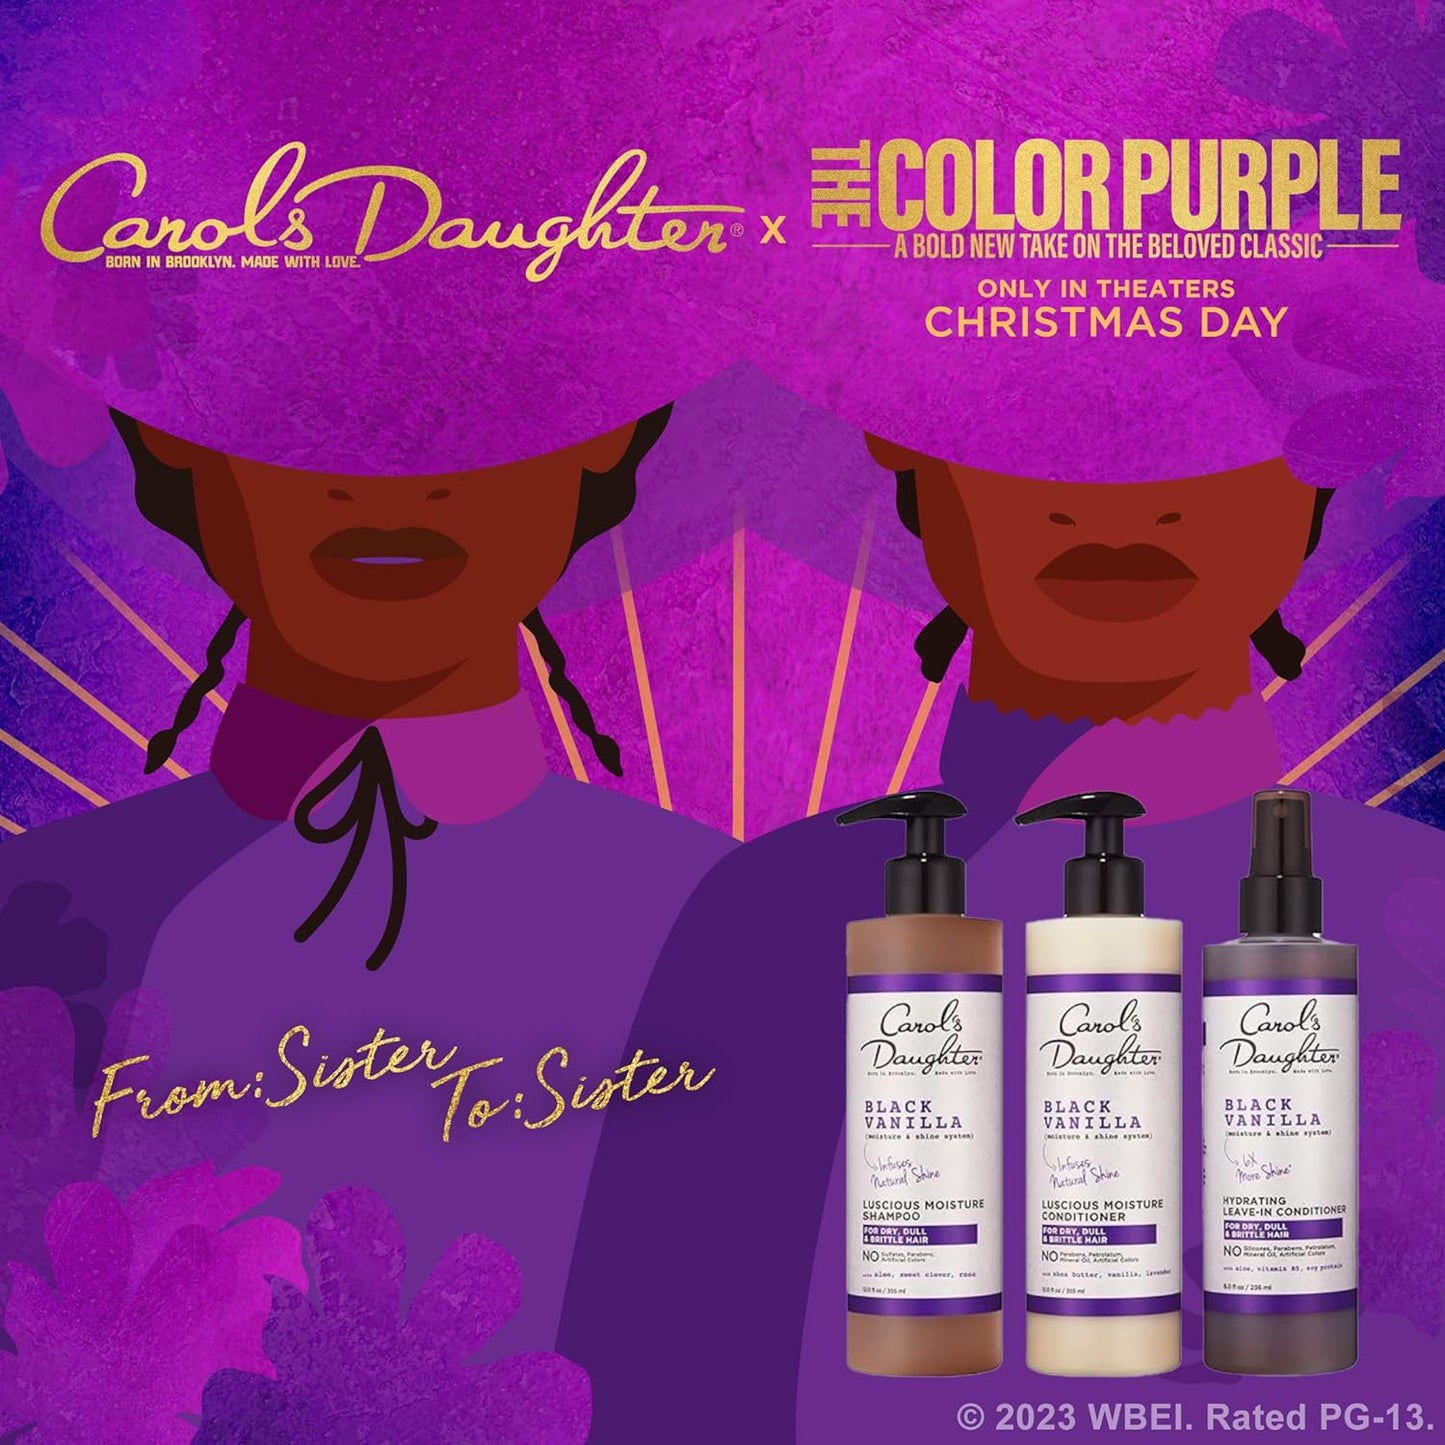 Carol’s Daughter Black Vanilla Curly Hair Sulfate Free Shampoo, Conditioner and Smoothie Set for Dry, Damaged Natural Hair, Moisturizing & Hydrating Hair Care Kit - with Shea Butter, Aloe & Rosemary